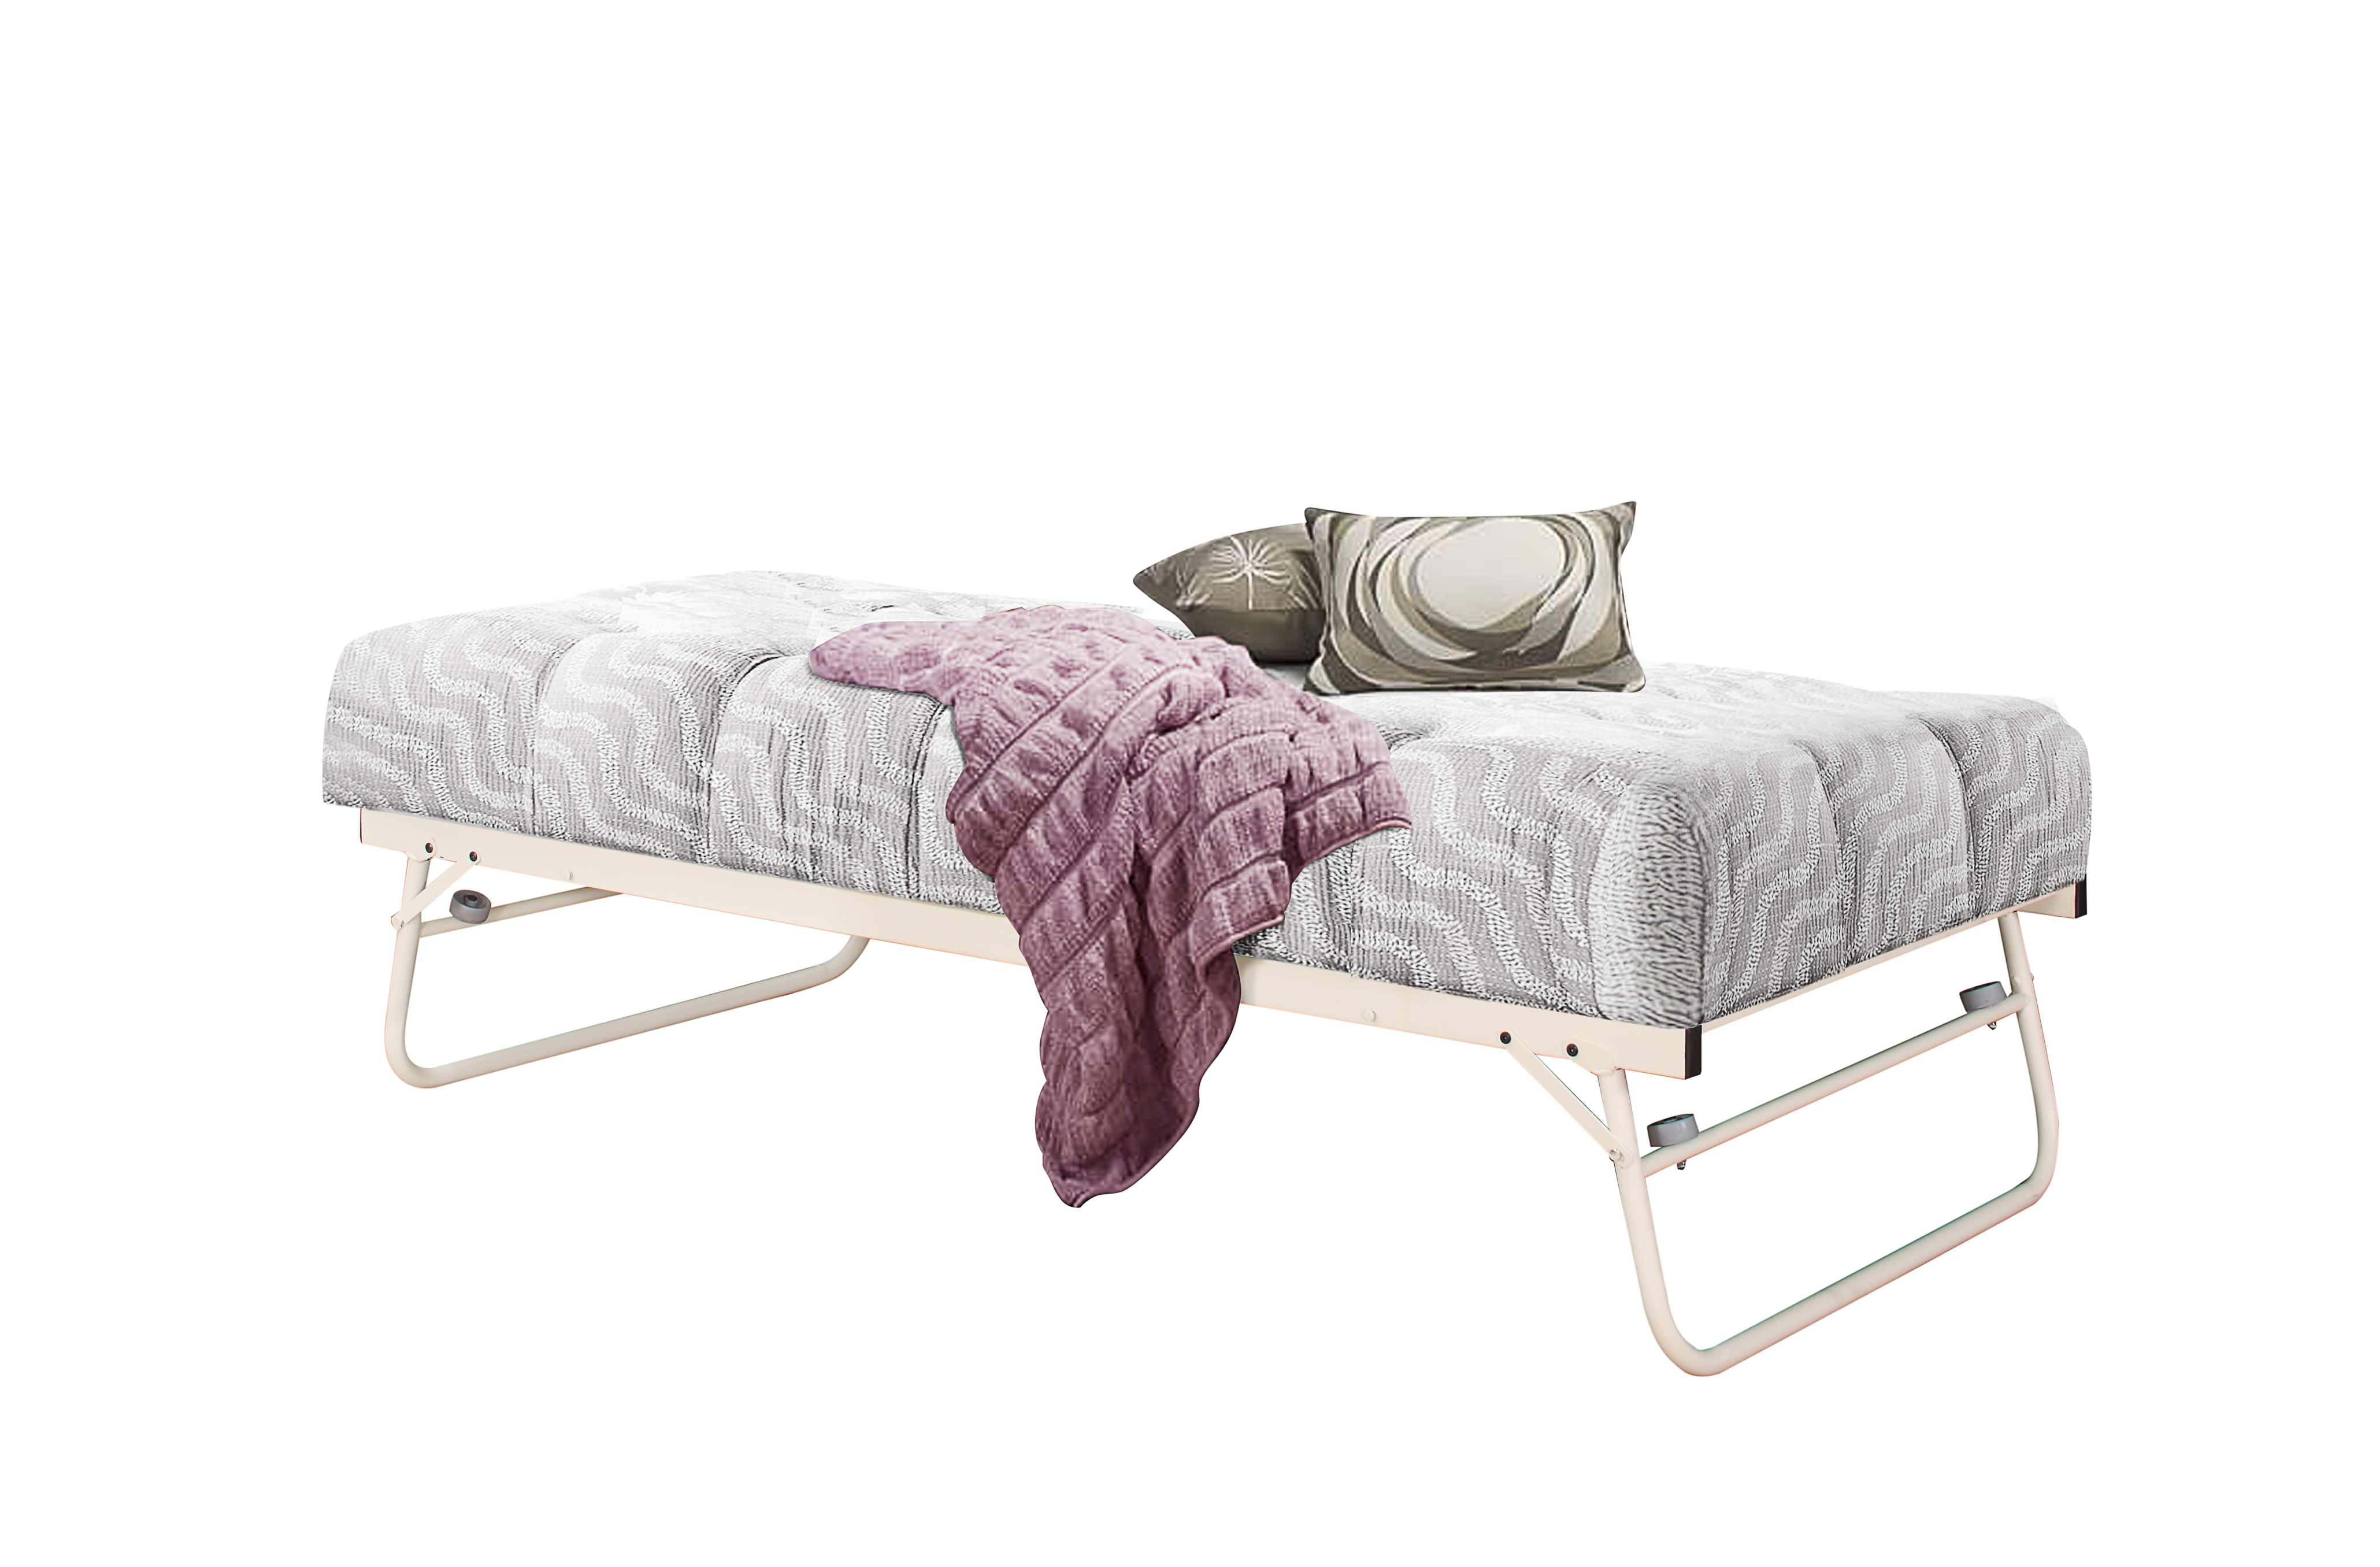 Trundle Day Bed Assembly Instructions (Birlea)